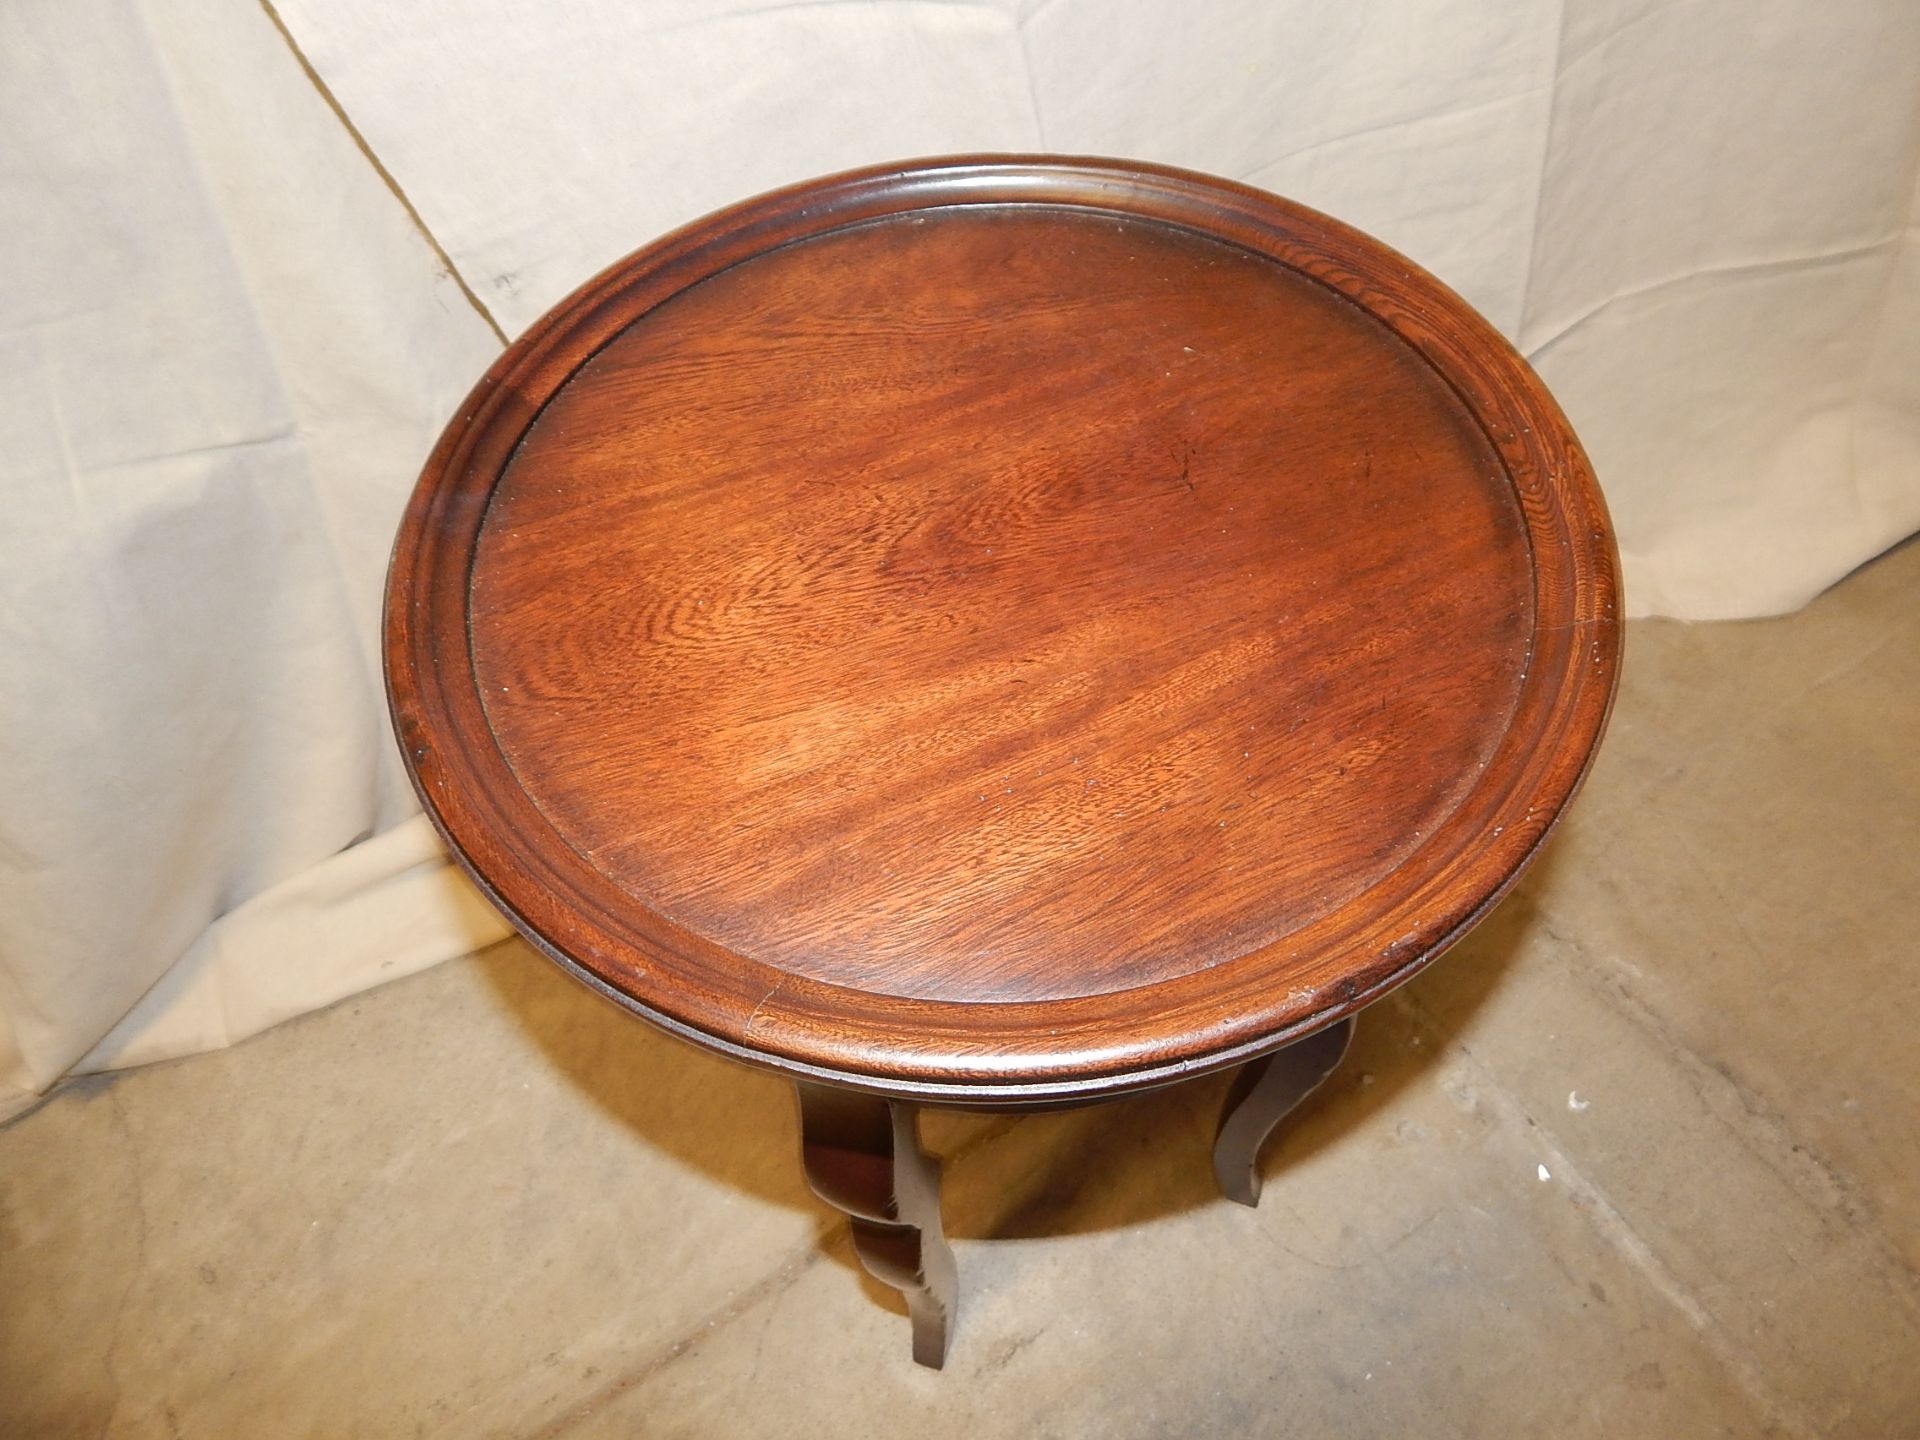 Baker Furniture Small Table - Image 2 of 3